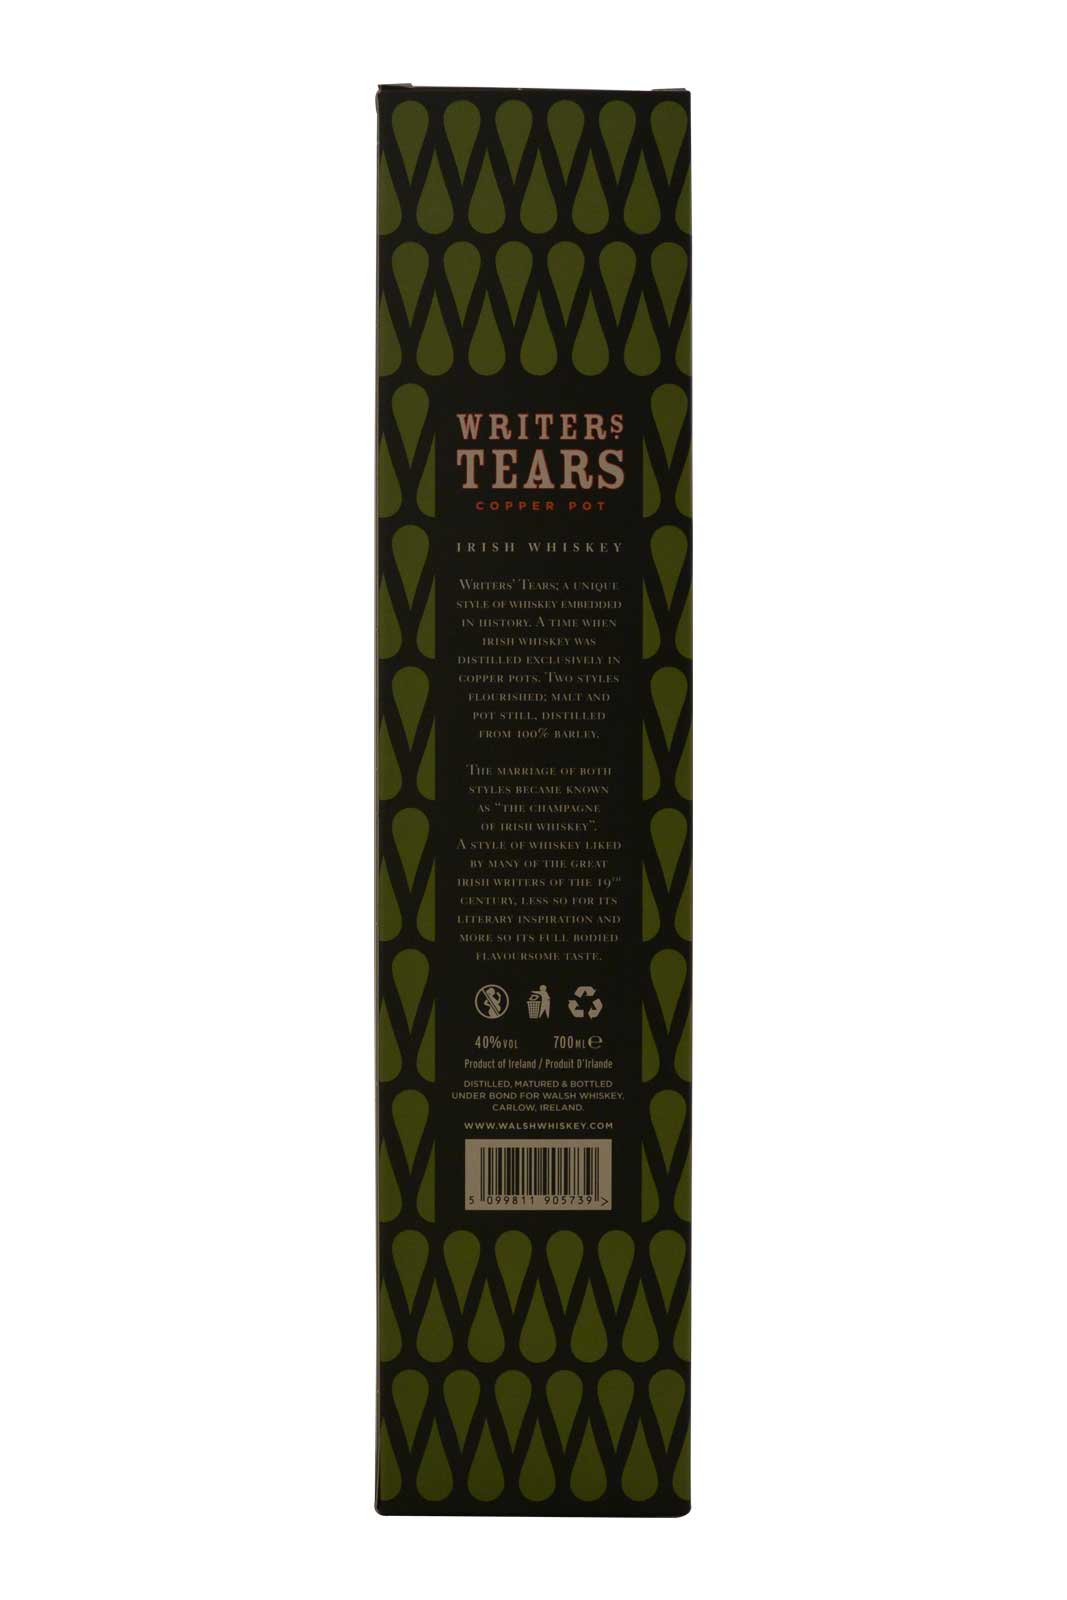 Writers Tears Copper Pot - Special edition